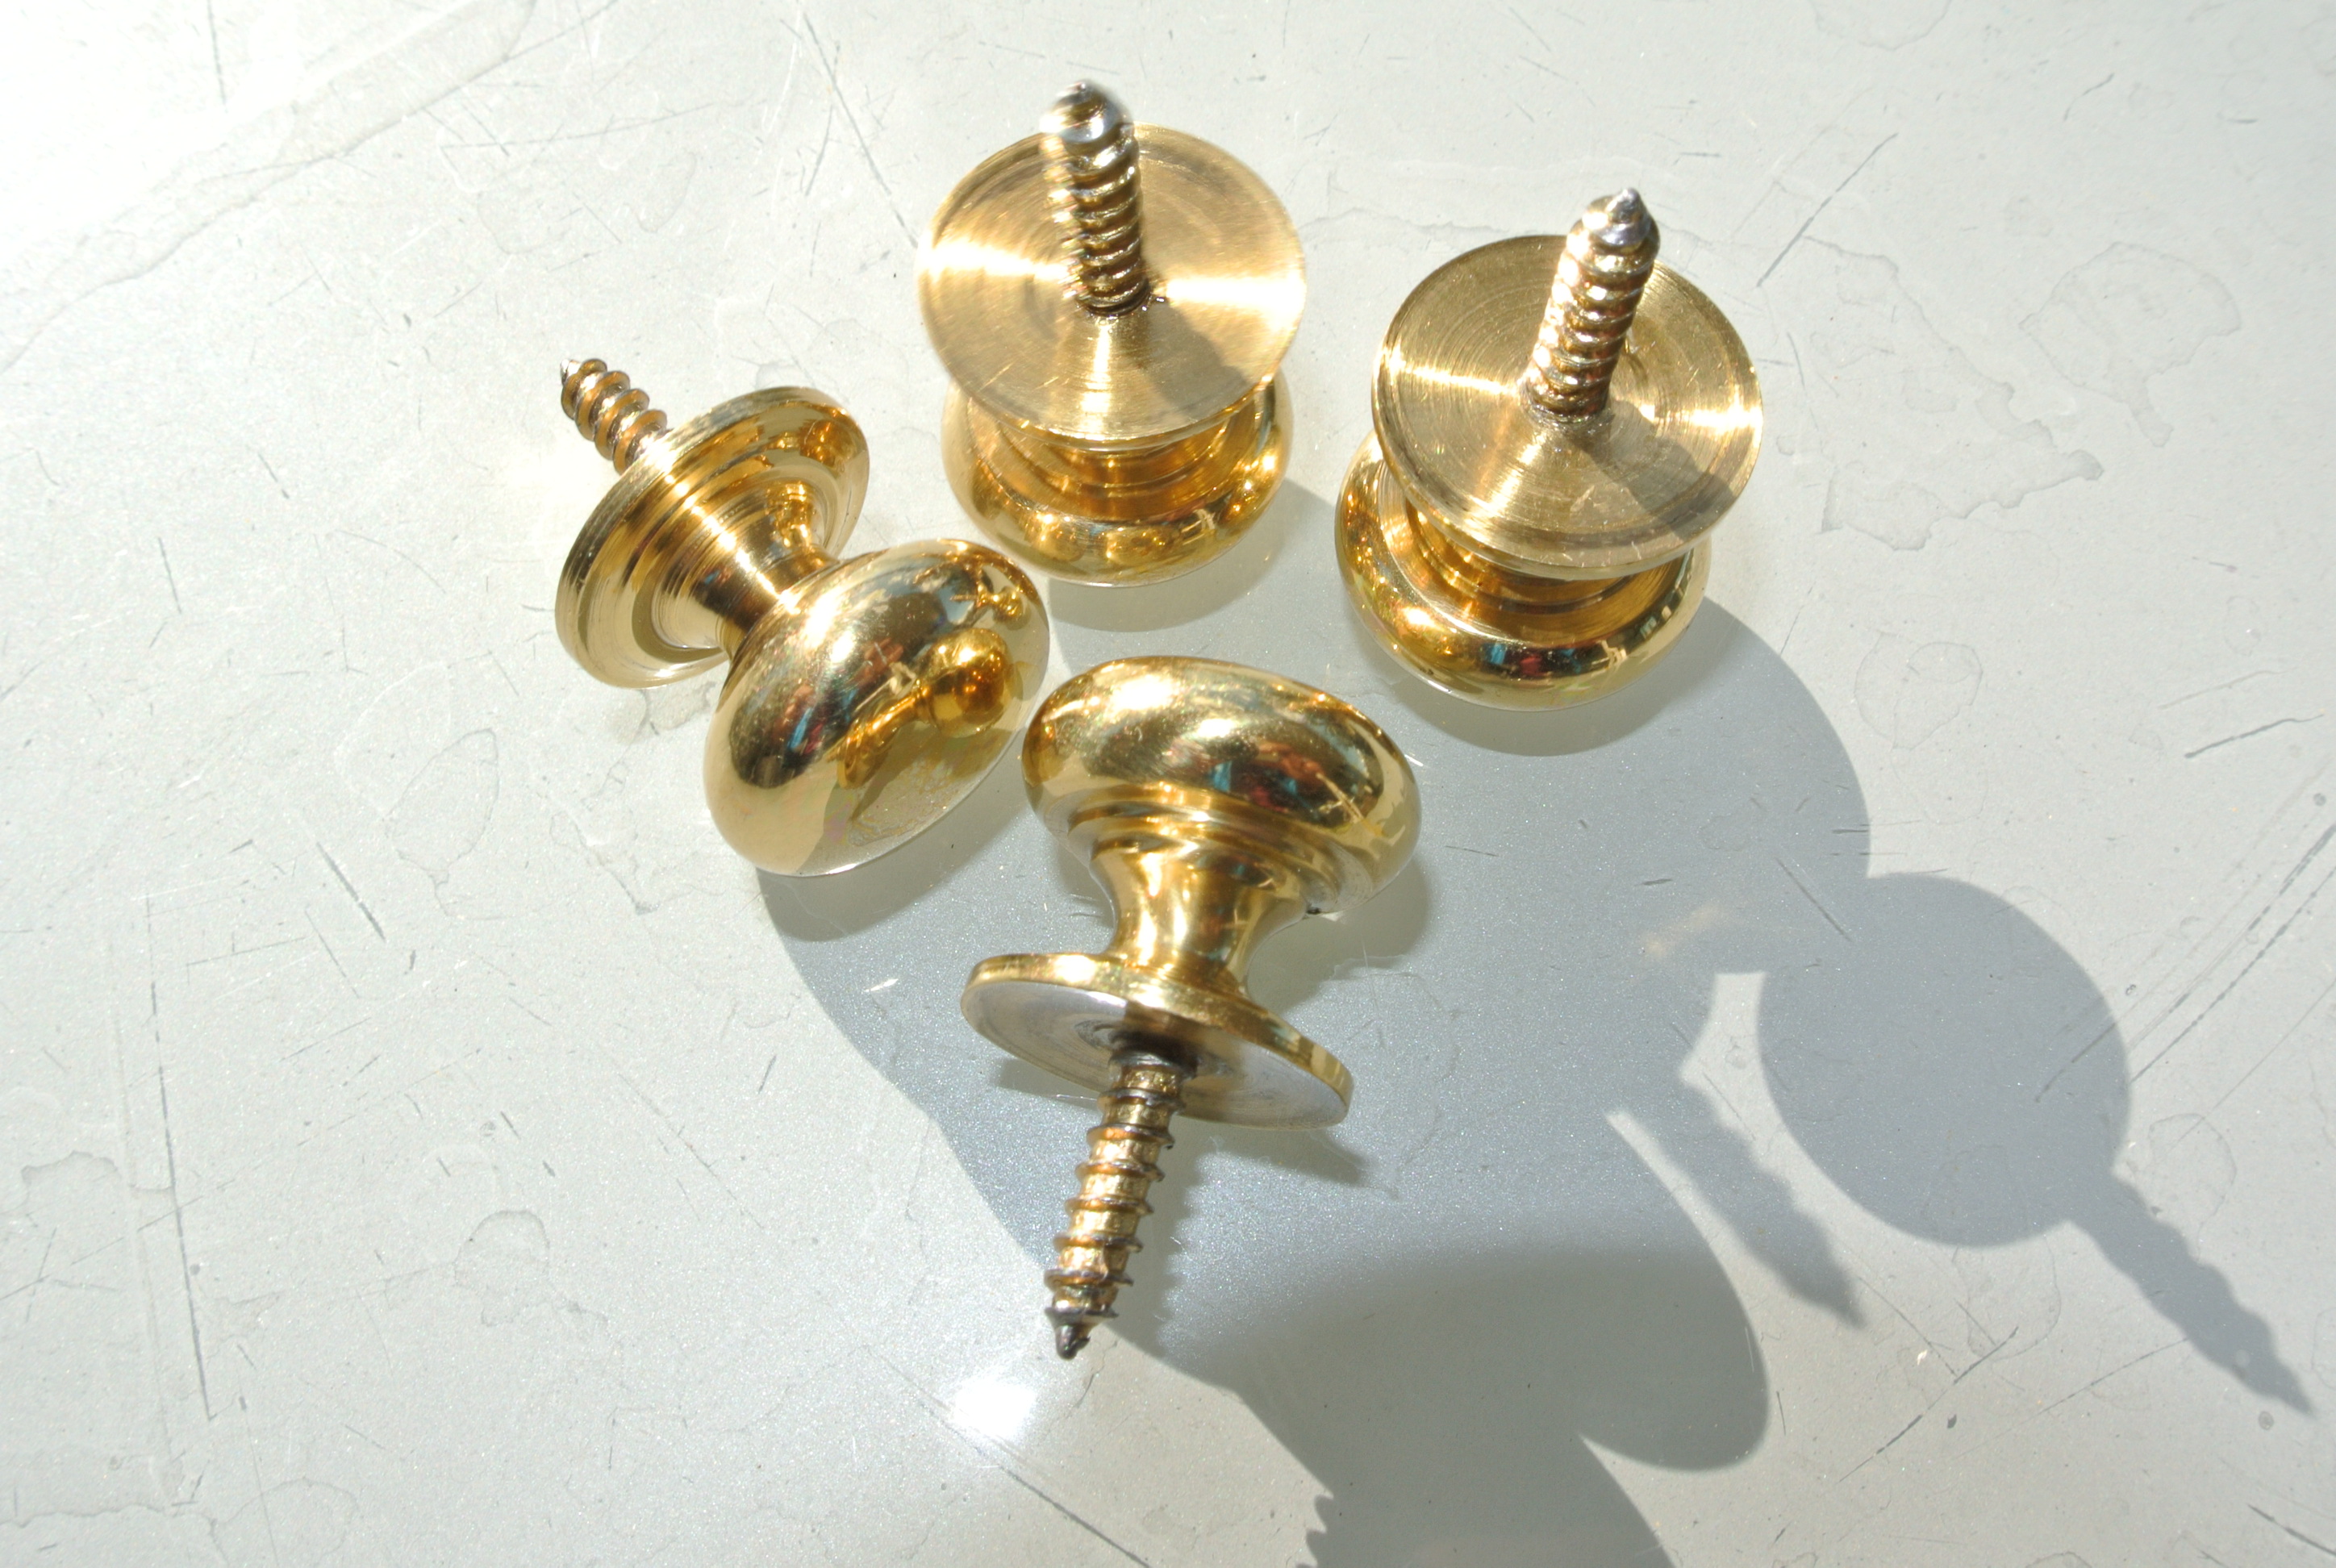 4 very small screw KNOBS pulls handles watson 237A antique solid heavy